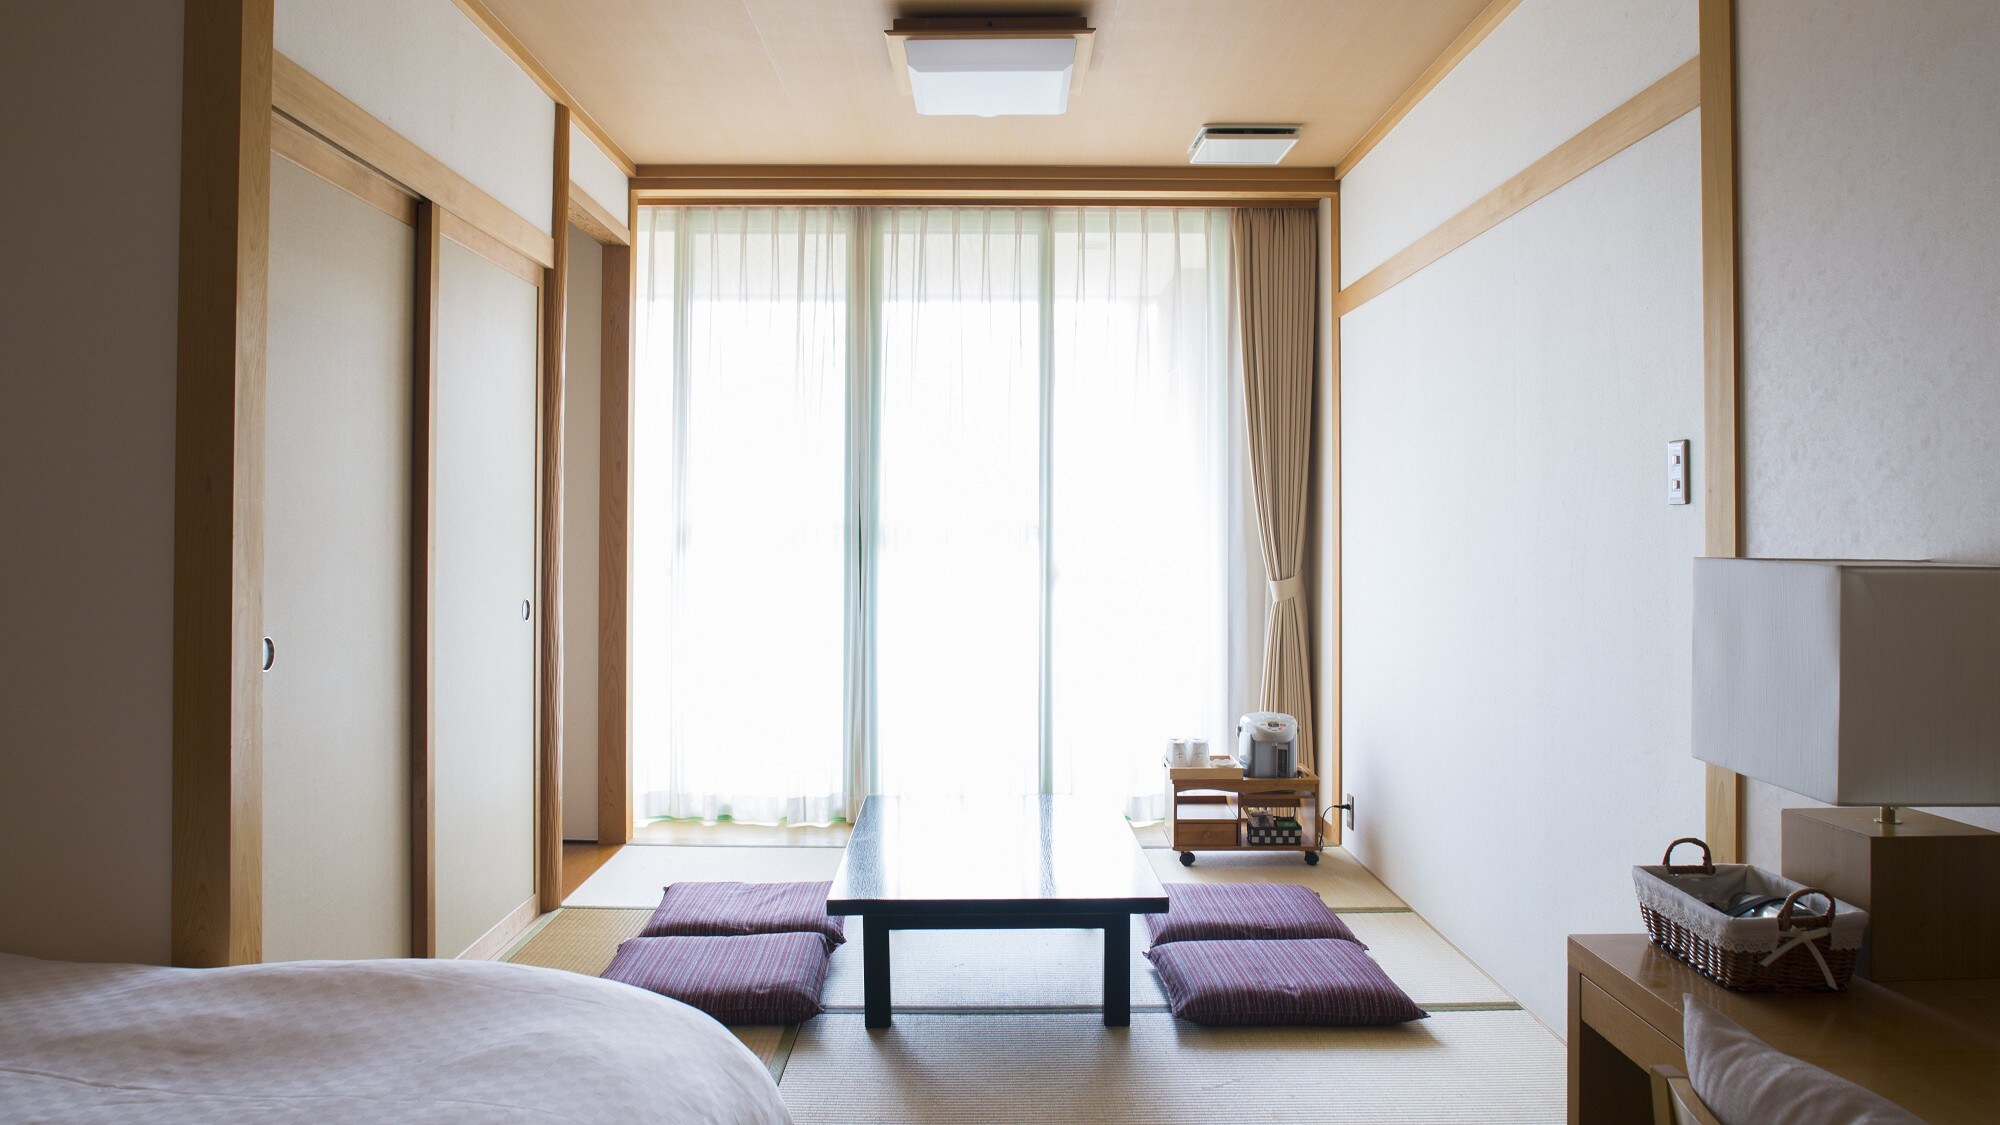 ◆ A relaxing Japanese and Western room for two people